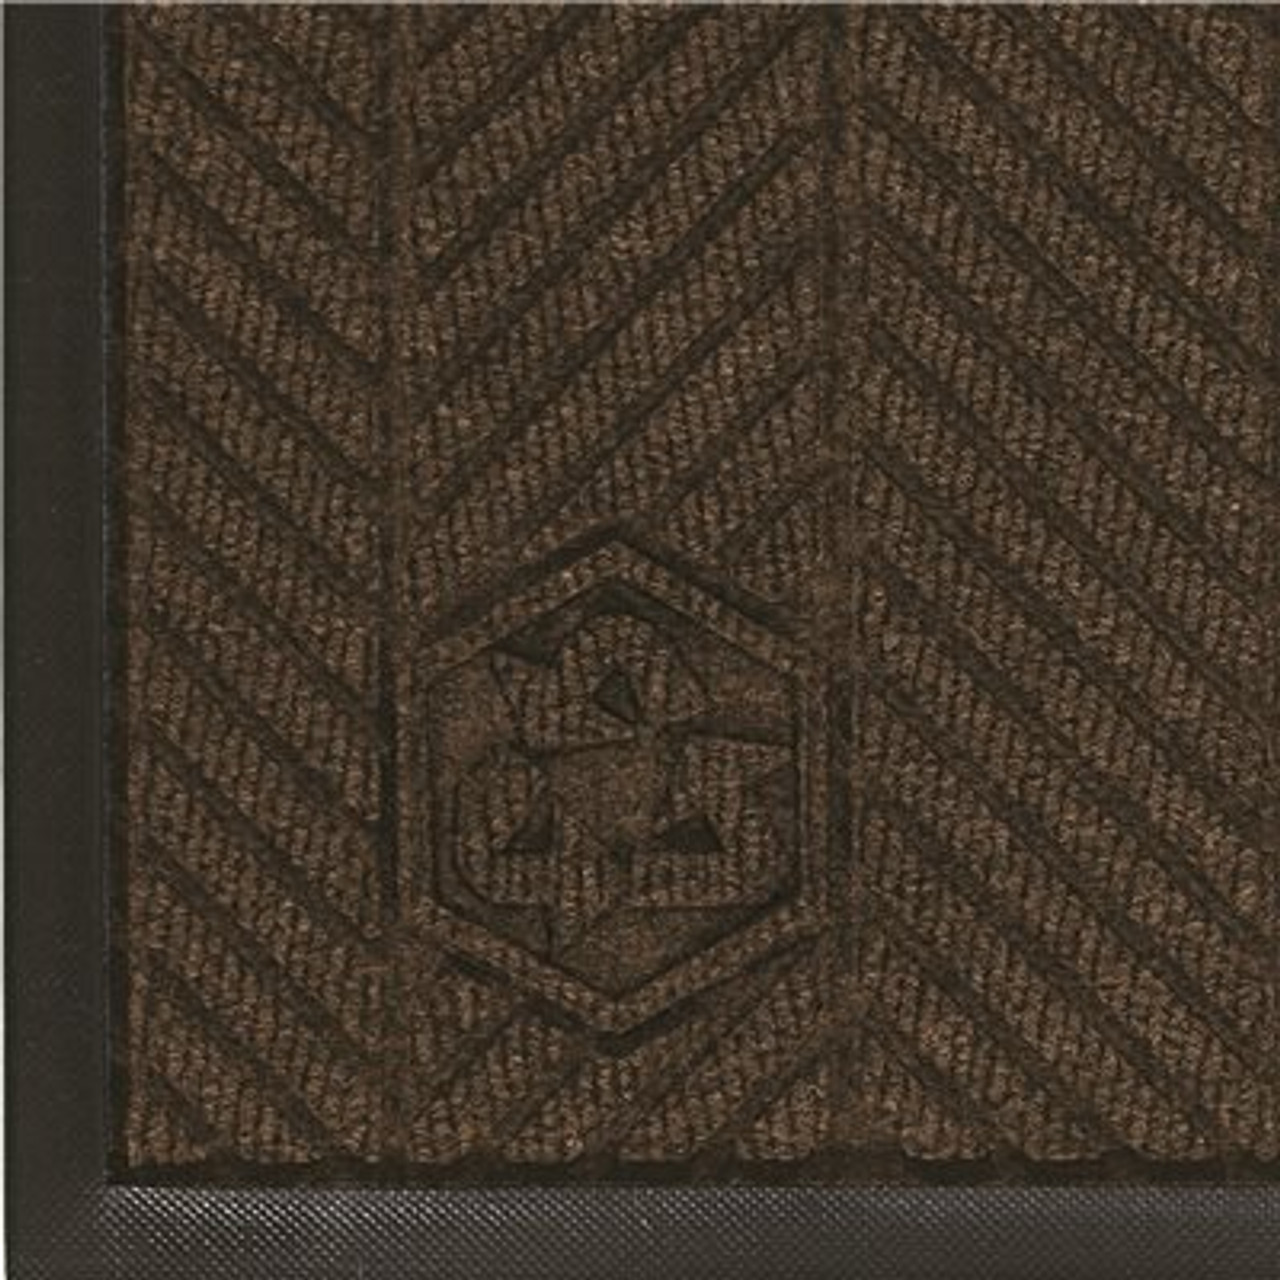 M+A Matting Waterhog Eco Elite Classic Chestnut Brown 45 In. X 70 In. Universal Cleated Backing Indoor / Outdoor Mat